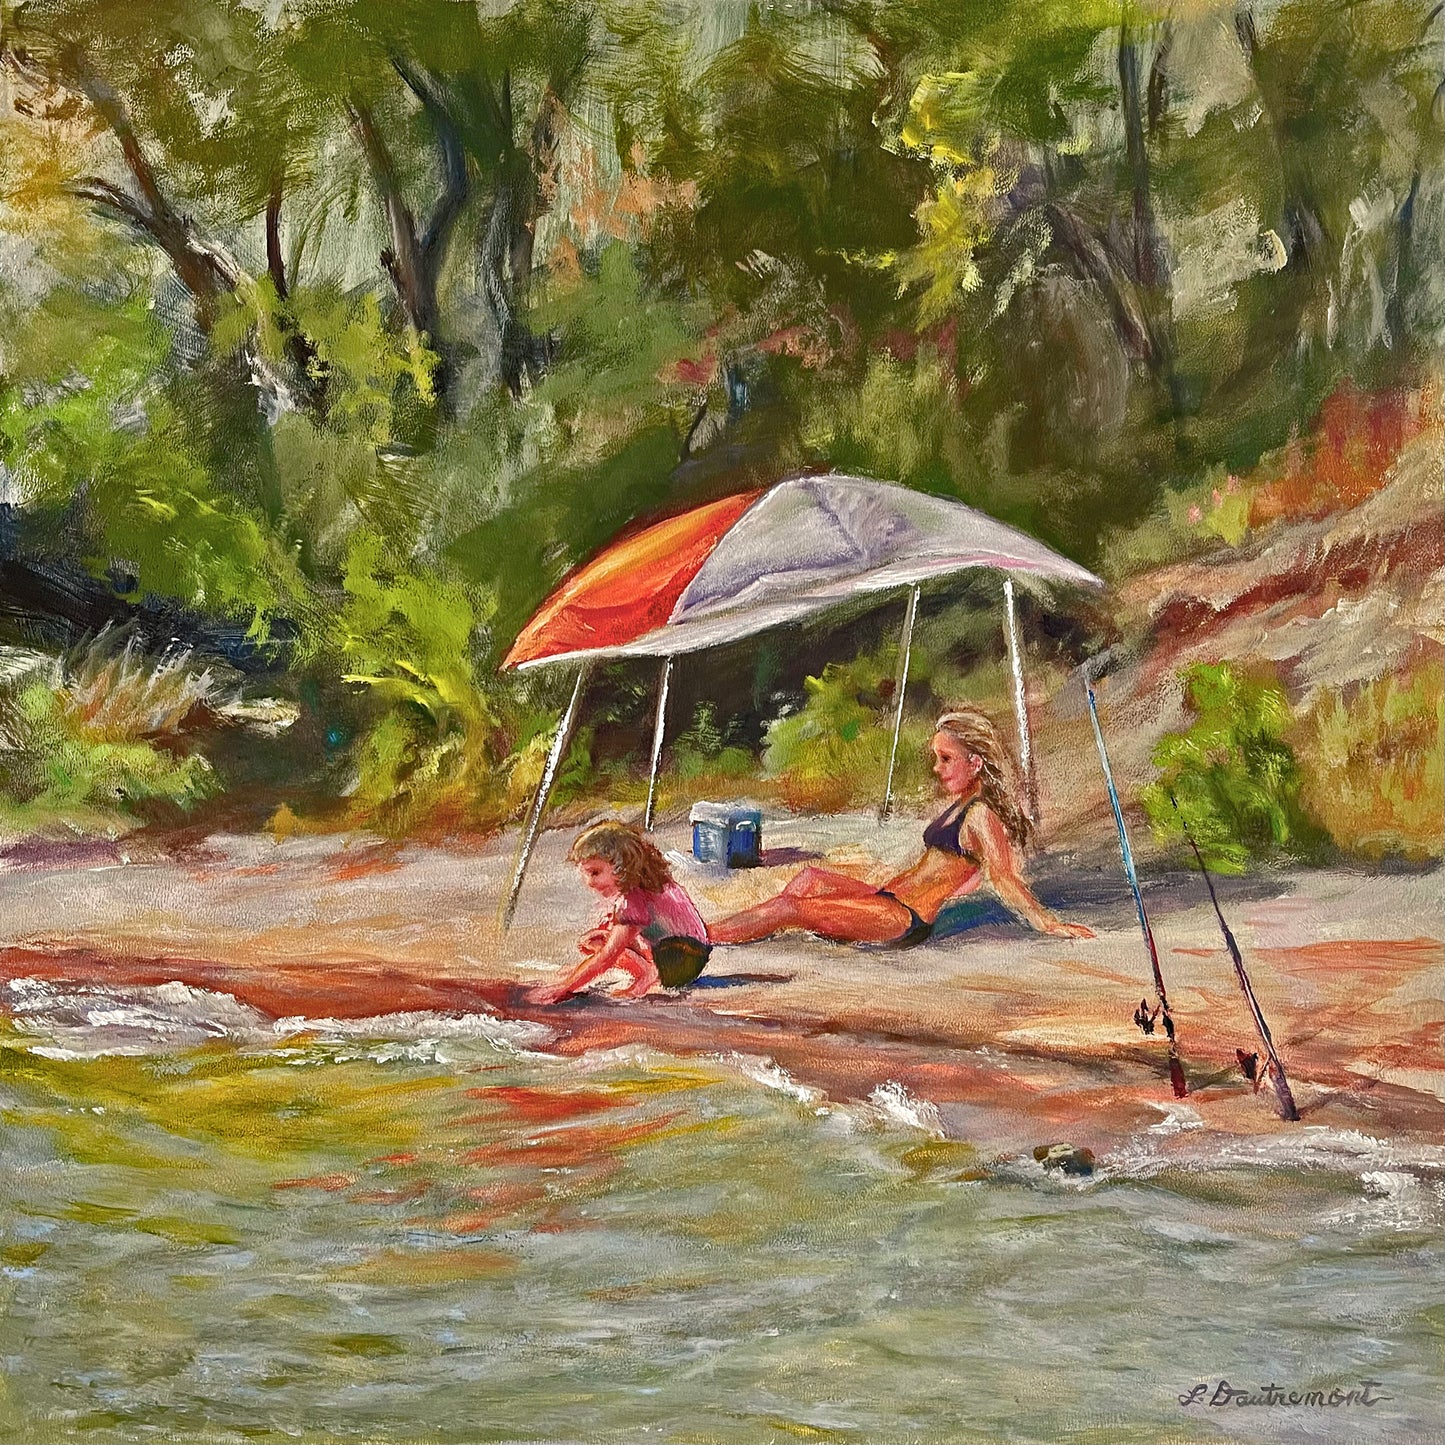 Day At the Beach - Original Painting